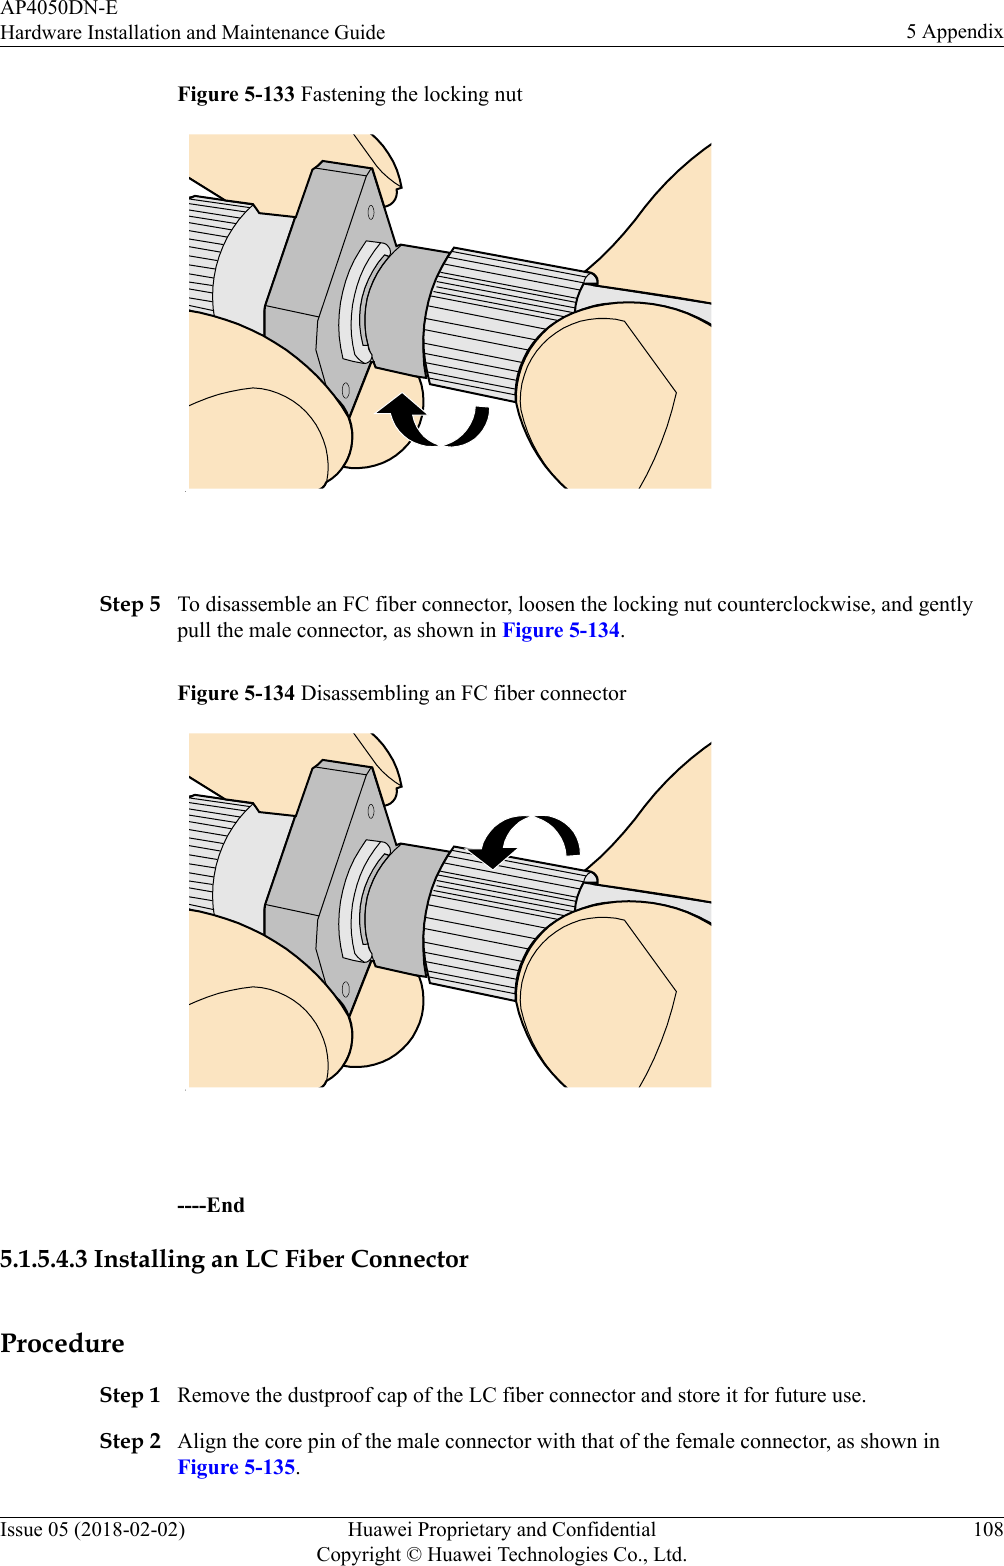 Figure 5-133 Fastening the locking nut Step 5 To disassemble an FC fiber connector, loosen the locking nut counterclockwise, and gentlypull the male connector, as shown in Figure 5-134.Figure 5-134 Disassembling an FC fiber connector ----End5.1.5.4.3 Installing an LC Fiber ConnectorProcedureStep 1 Remove the dustproof cap of the LC fiber connector and store it for future use.Step 2 Align the core pin of the male connector with that of the female connector, as shown inFigure 5-135.AP4050DN-EHardware Installation and Maintenance Guide 5 AppendixIssue 05 (2018-02-02) Huawei Proprietary and ConfidentialCopyright © Huawei Technologies Co., Ltd.108